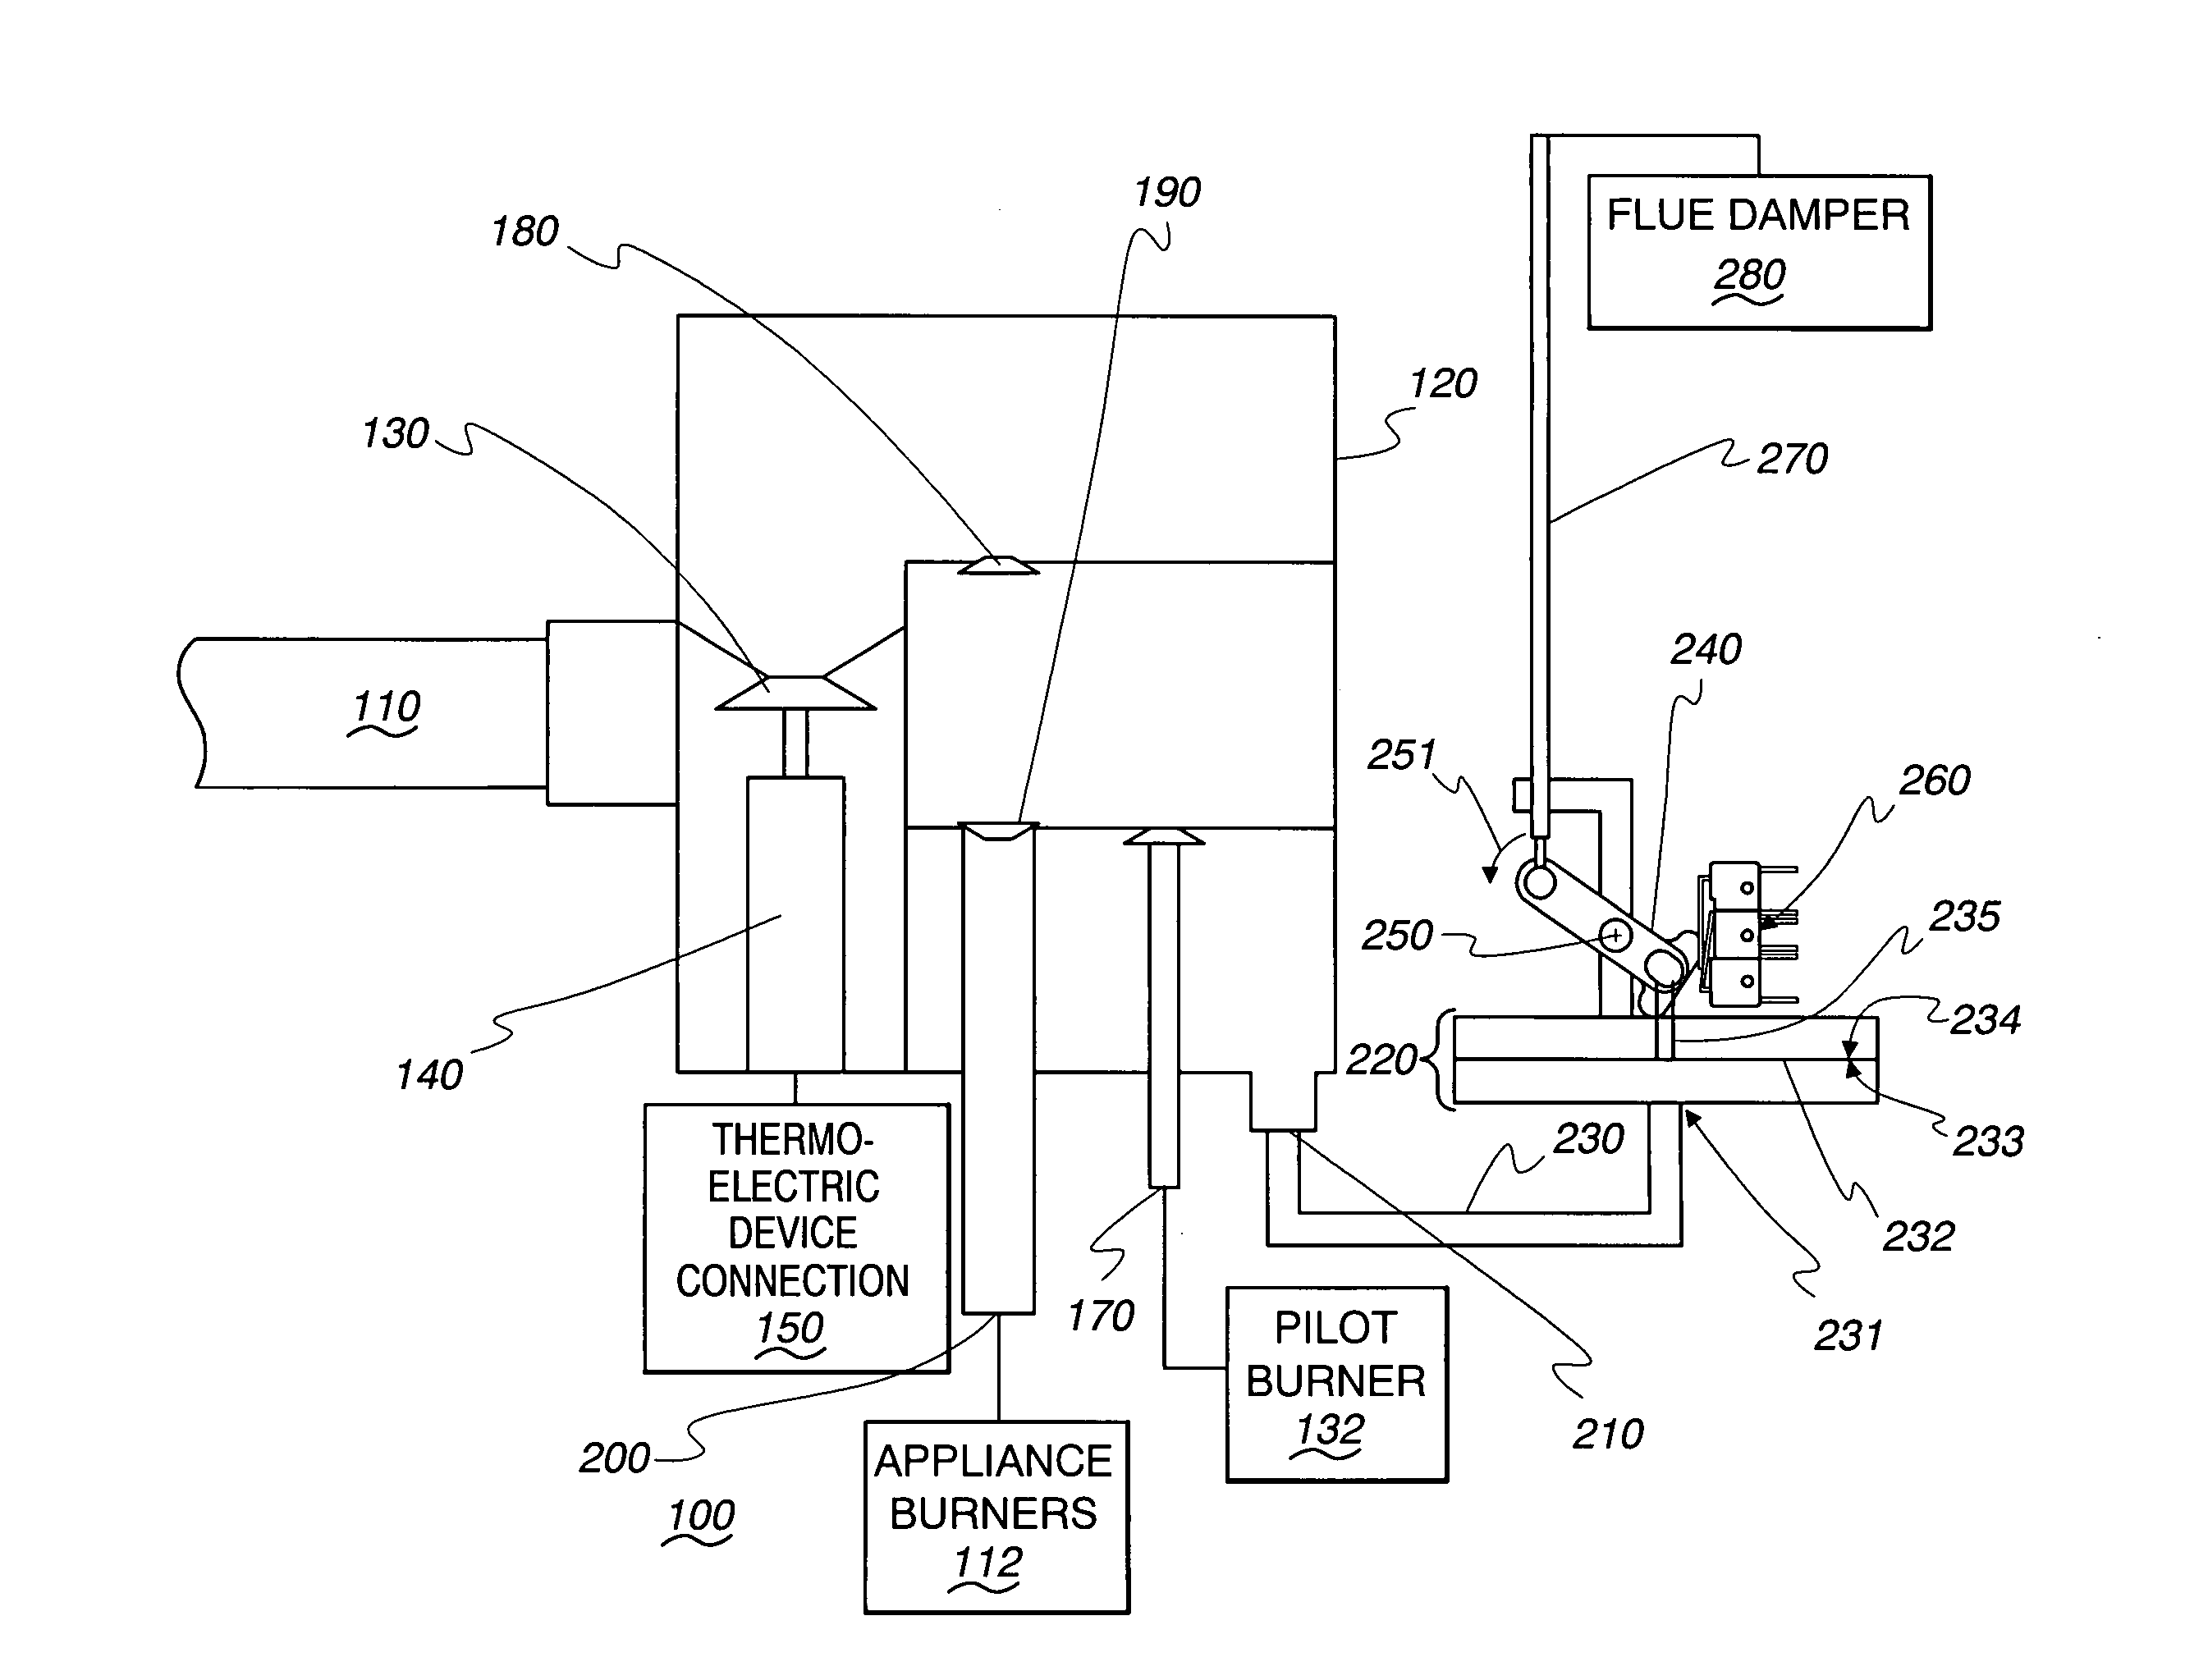 Apparatus and method for controlling a damper in a gas-fired appliance